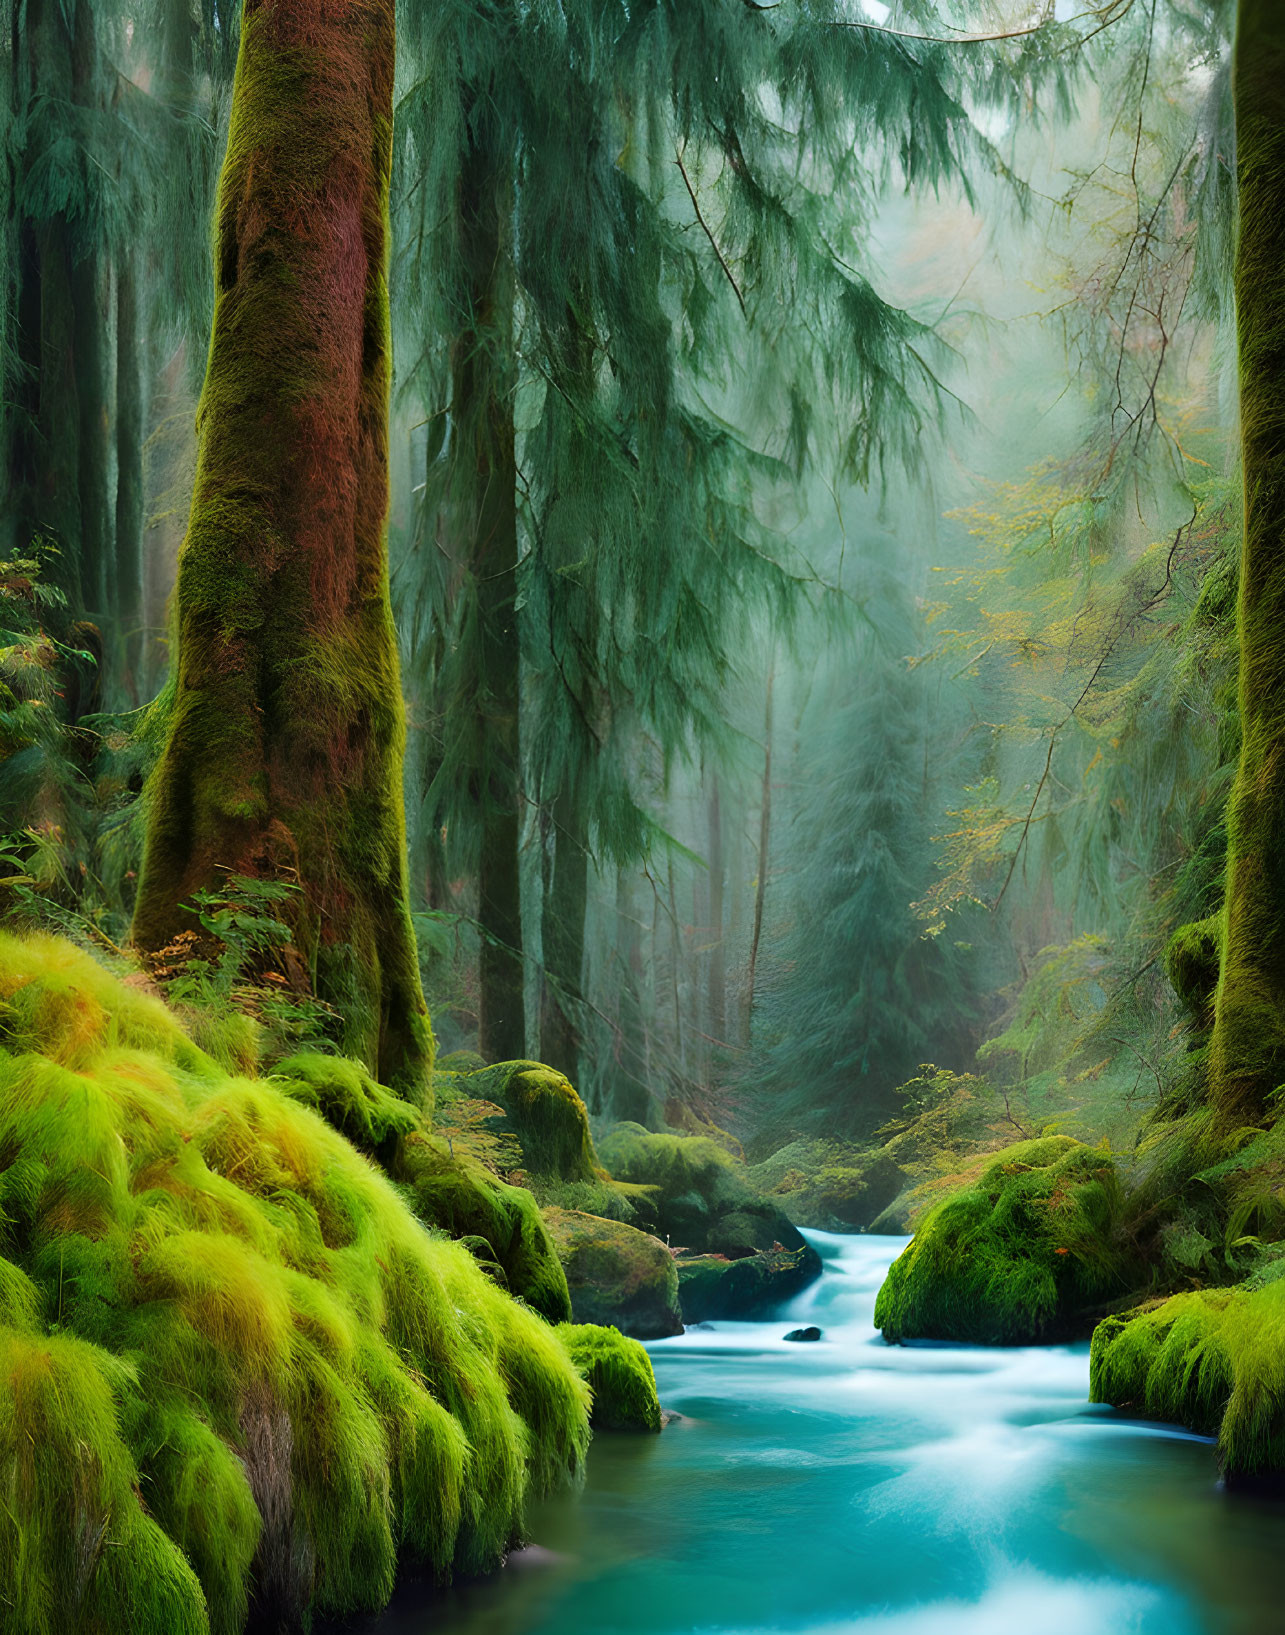 Serene stream in misty green forest with moss-covered rocks